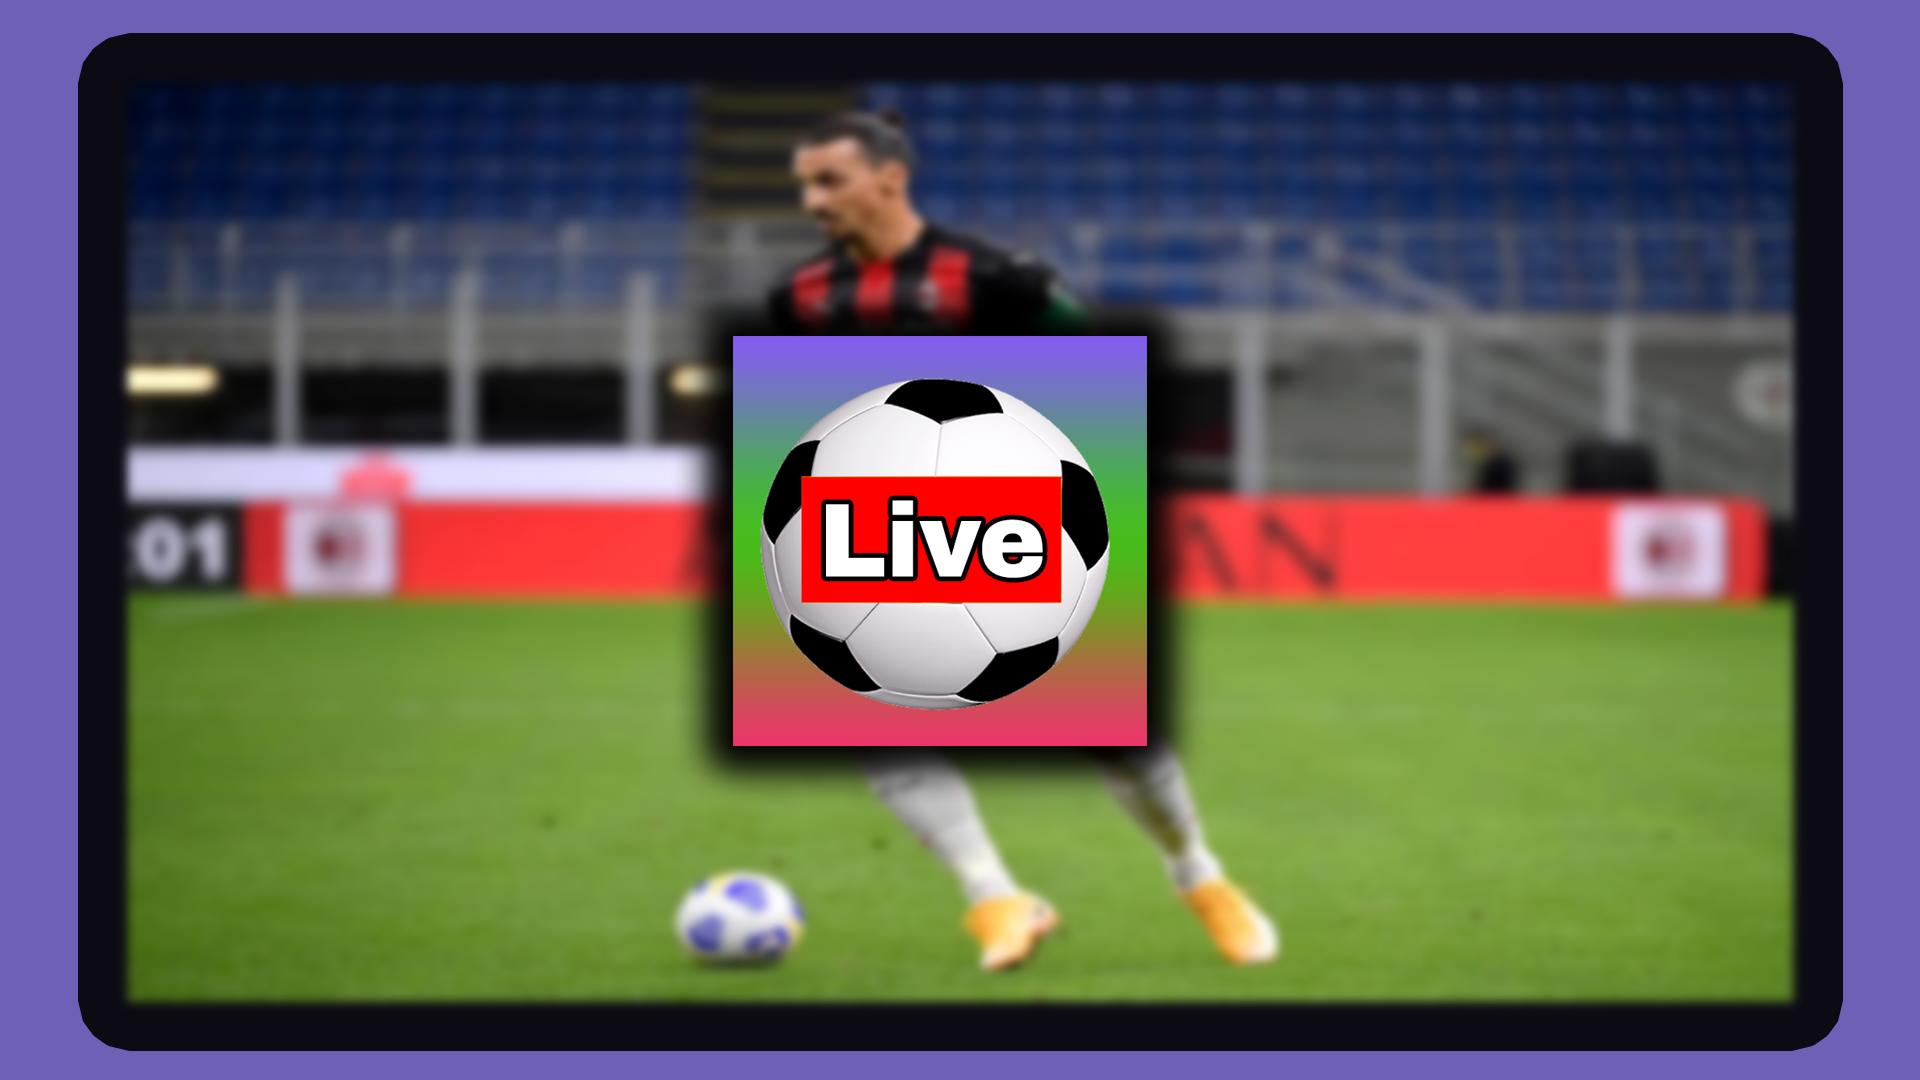 Football Live Score TV for Android - APK Download